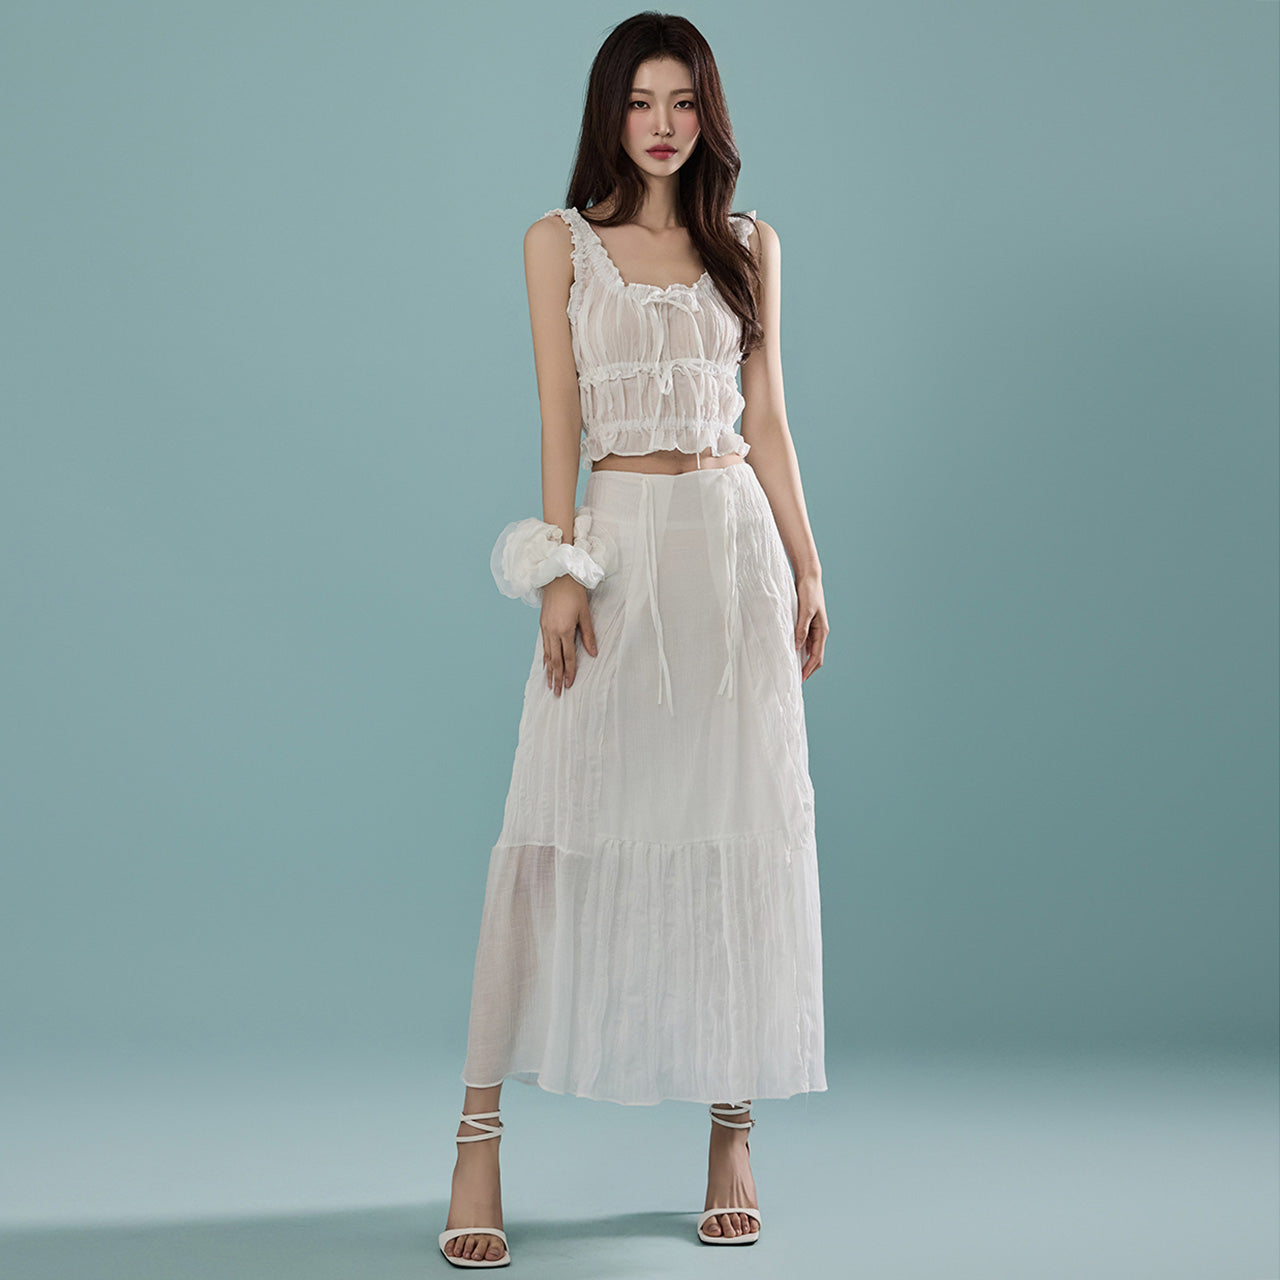 TP1859 Sleeveless Top and Skirt Sets